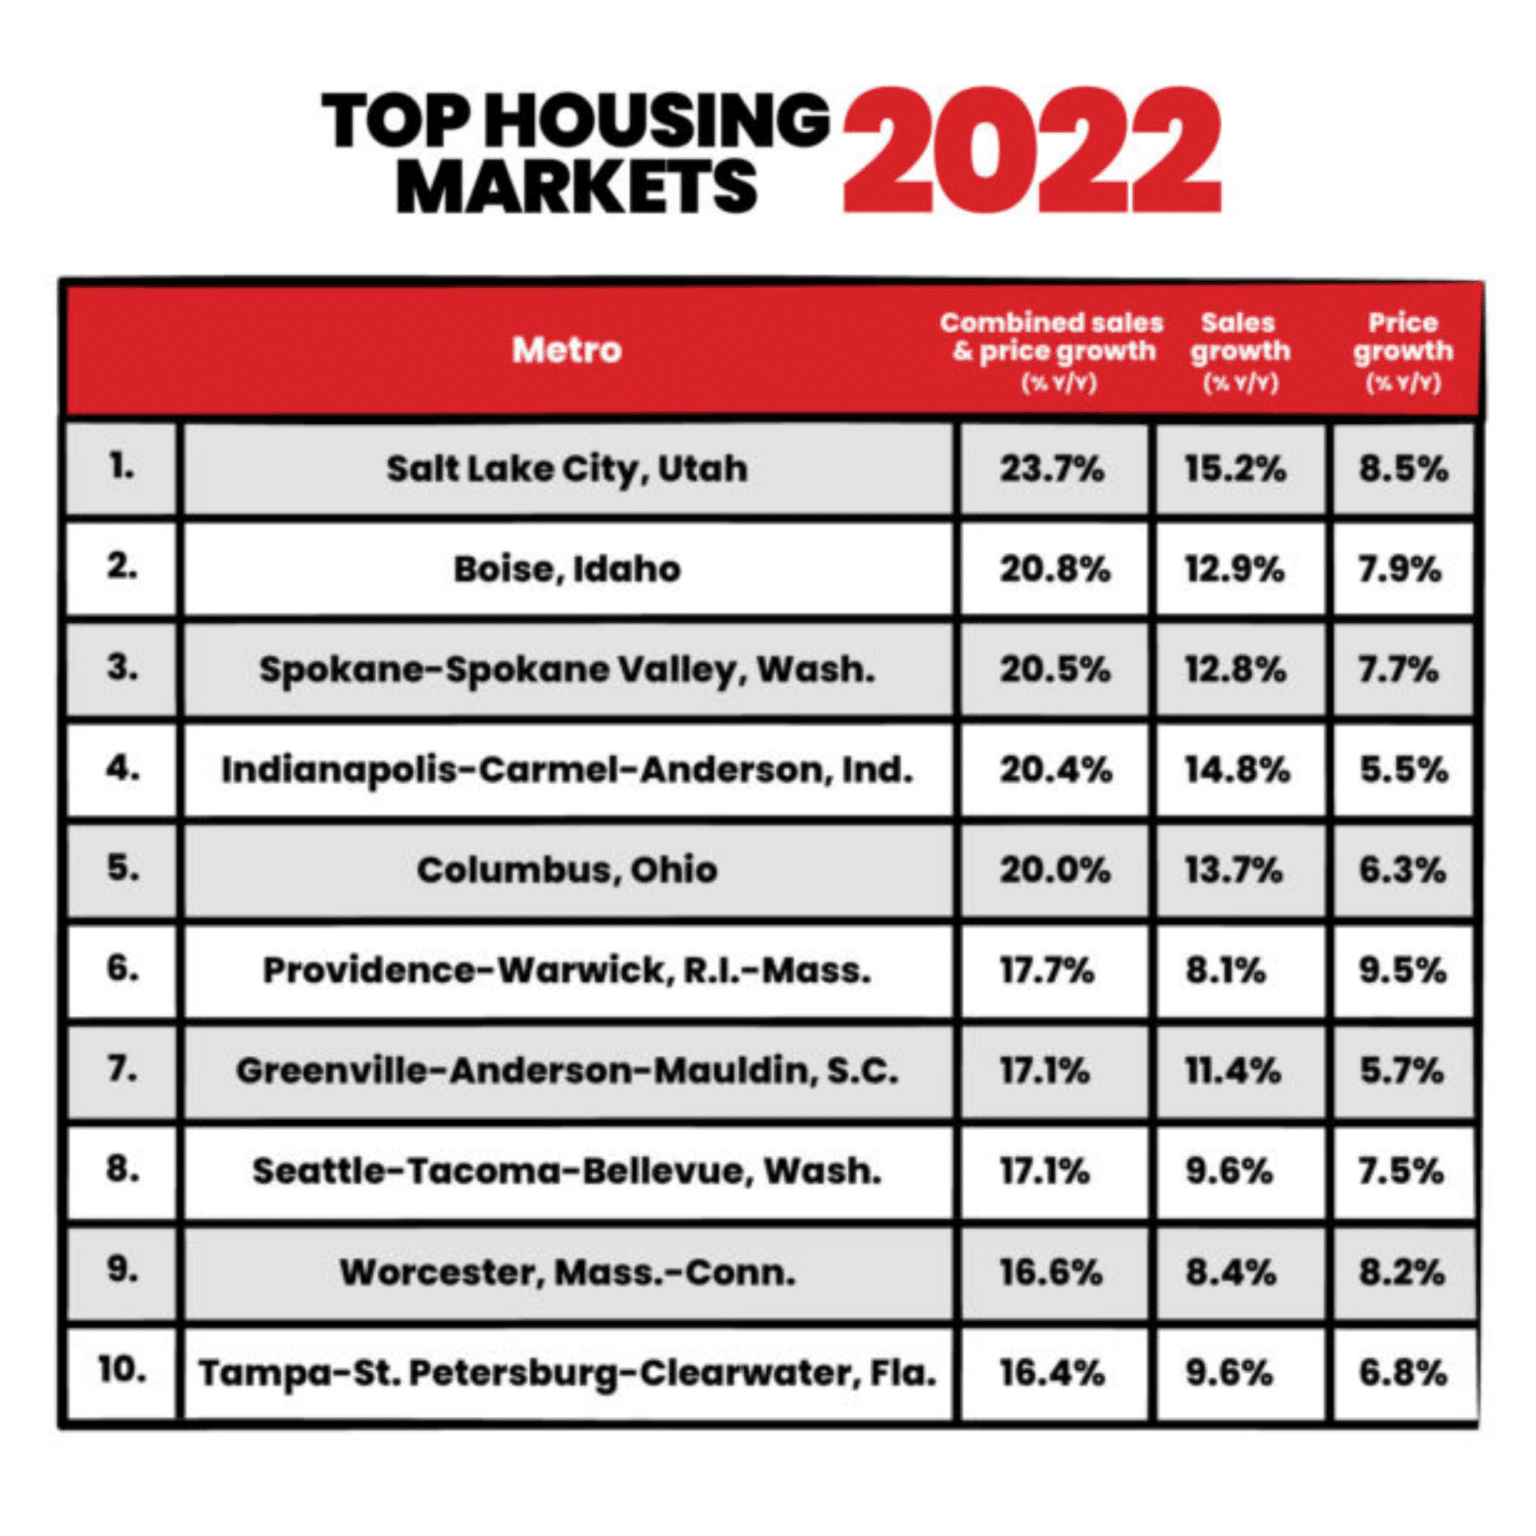 Buying a Home in the 2022 Top Housing Markets with Homes for Heroes